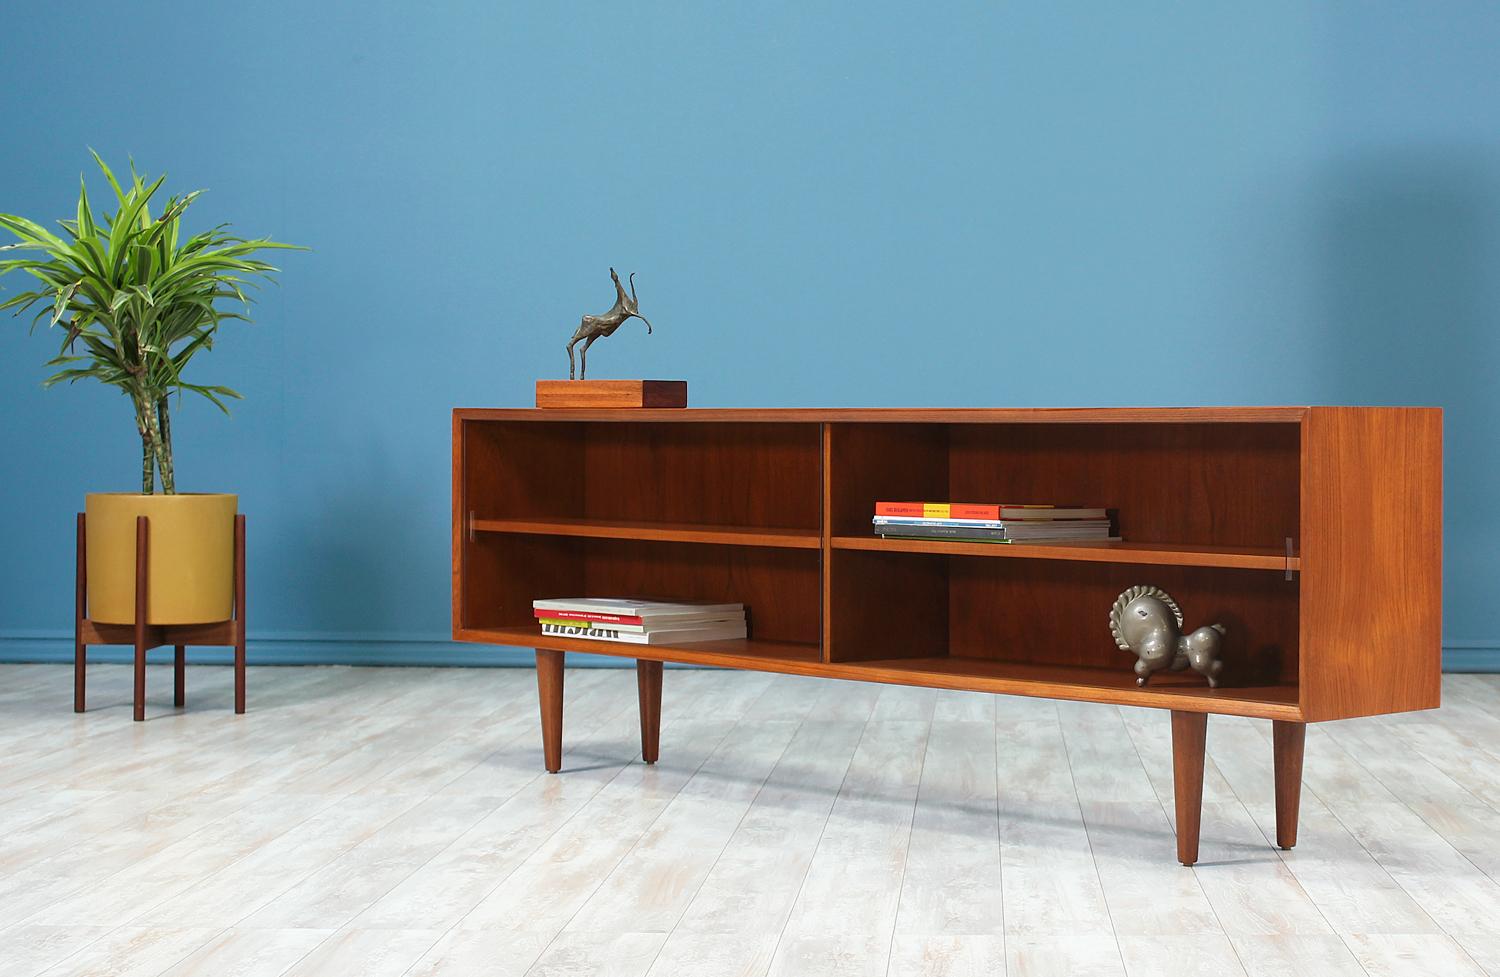 Danish Modern bookcase designed and manufactured in Denmark circa 1960’s. Beautifully crafted in teak wood, this stunning bookcase sits on 8” tapered legs and features two compartments with removable and adjustable wood shelves. The glass doors